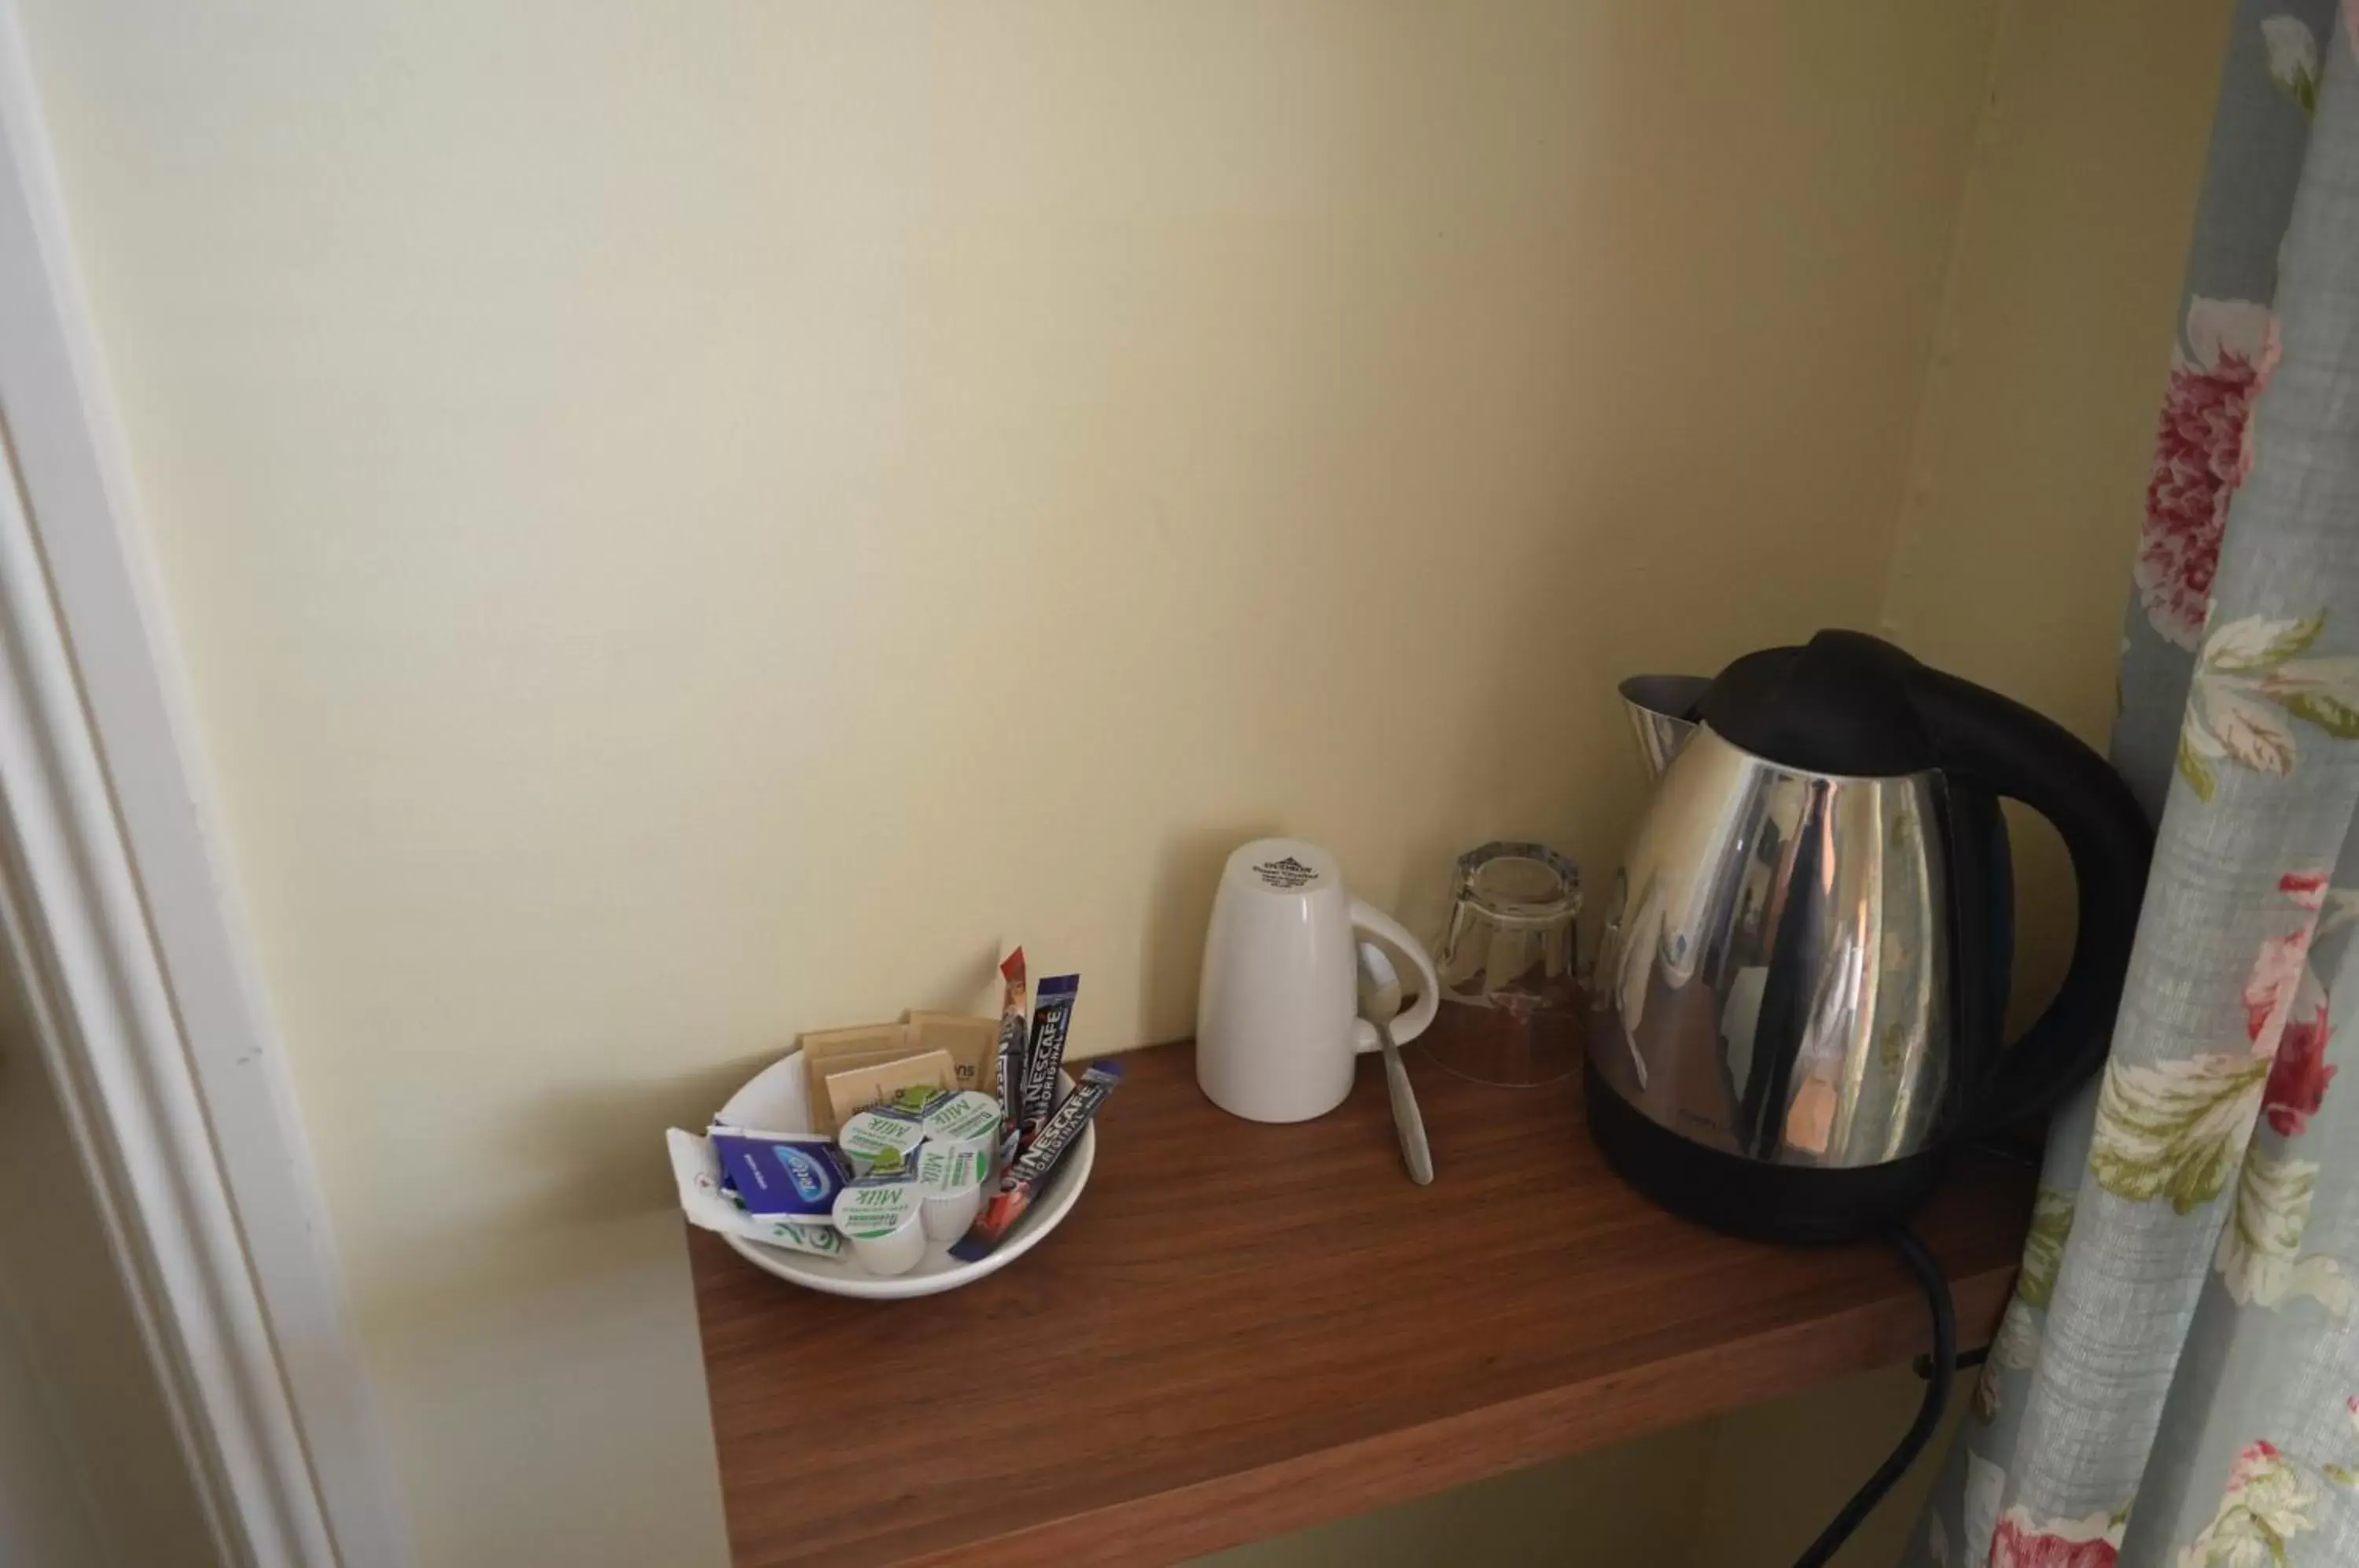 Coffee/tea facilities in The Ilchester Arms Hotel, Ilchester Somerset